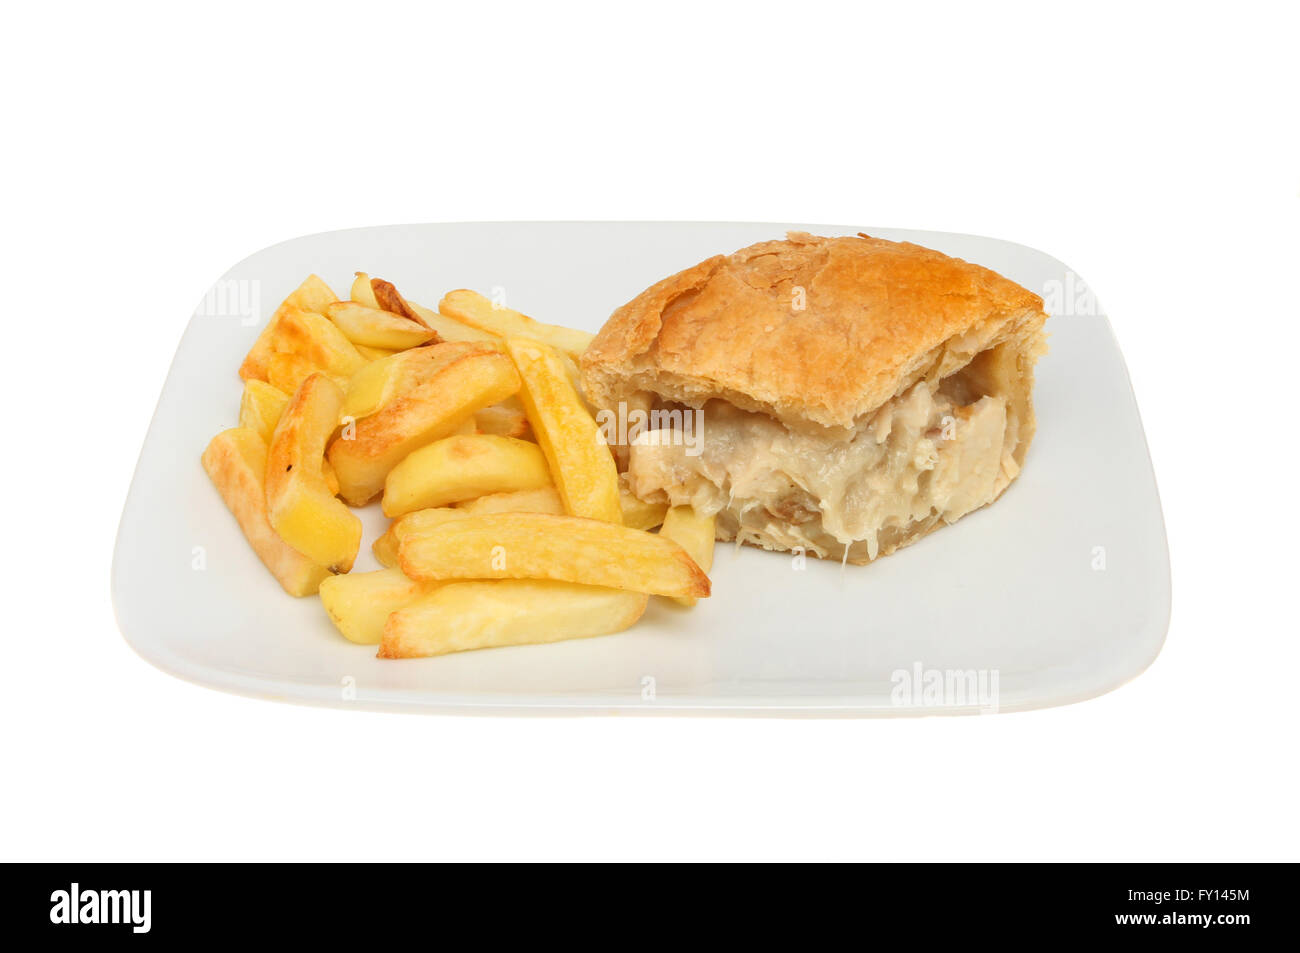 Portion of chicken pie and potato chips on a plate isolated against white Stock Photo